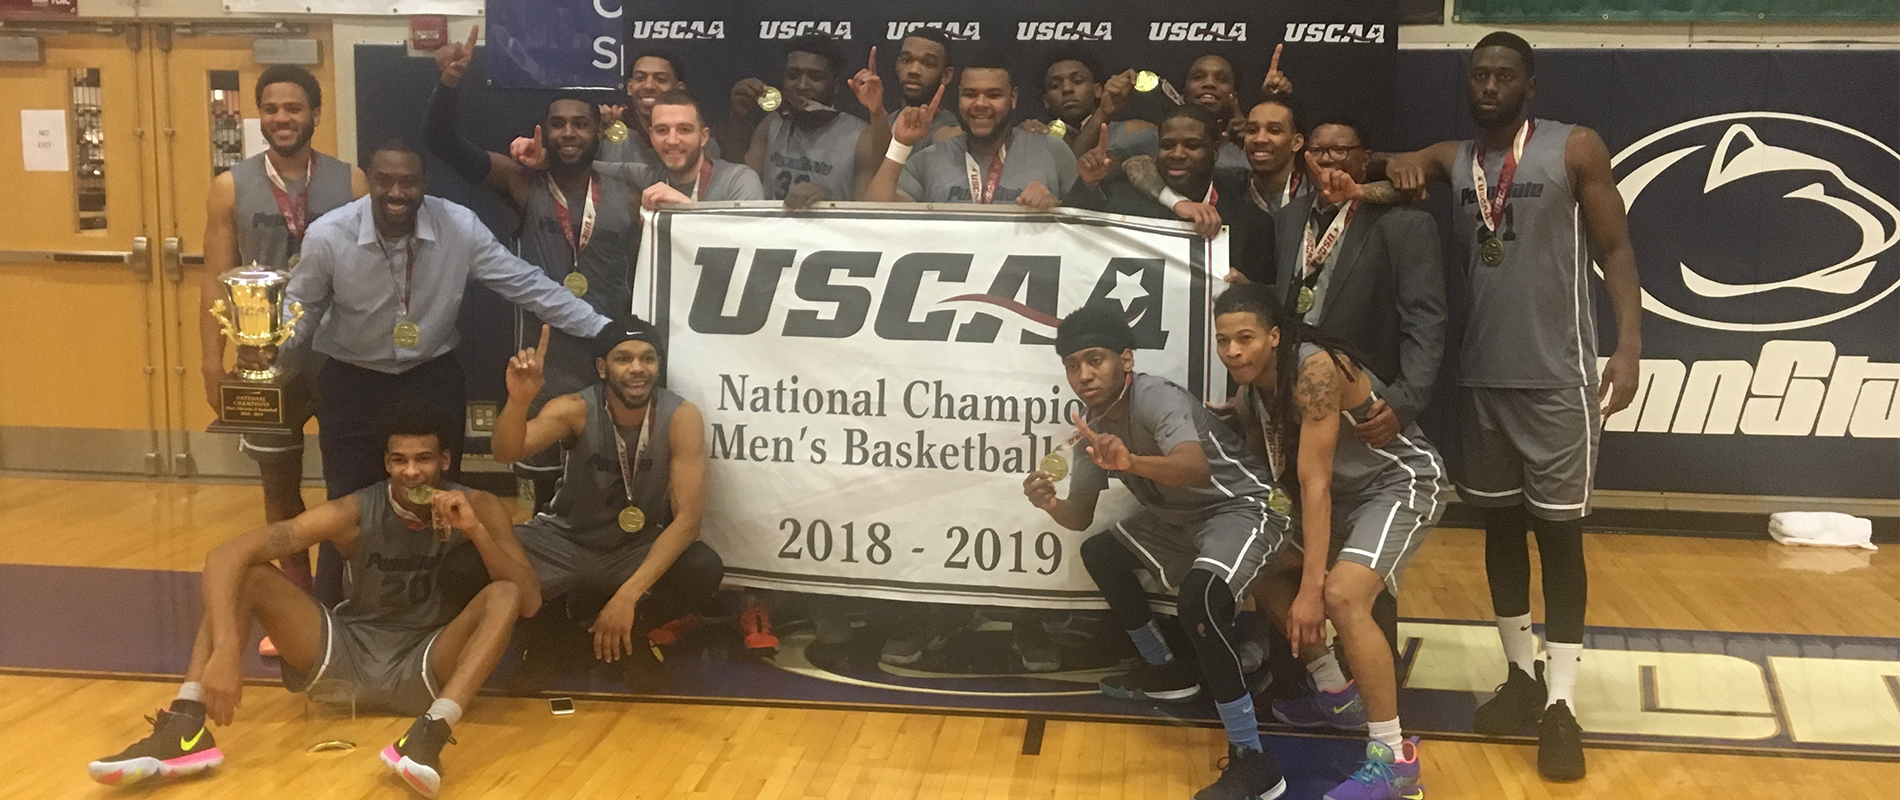 Penn State Wilkes-Barre men's basketball captured the 2019 USCAA Division II National Championship.